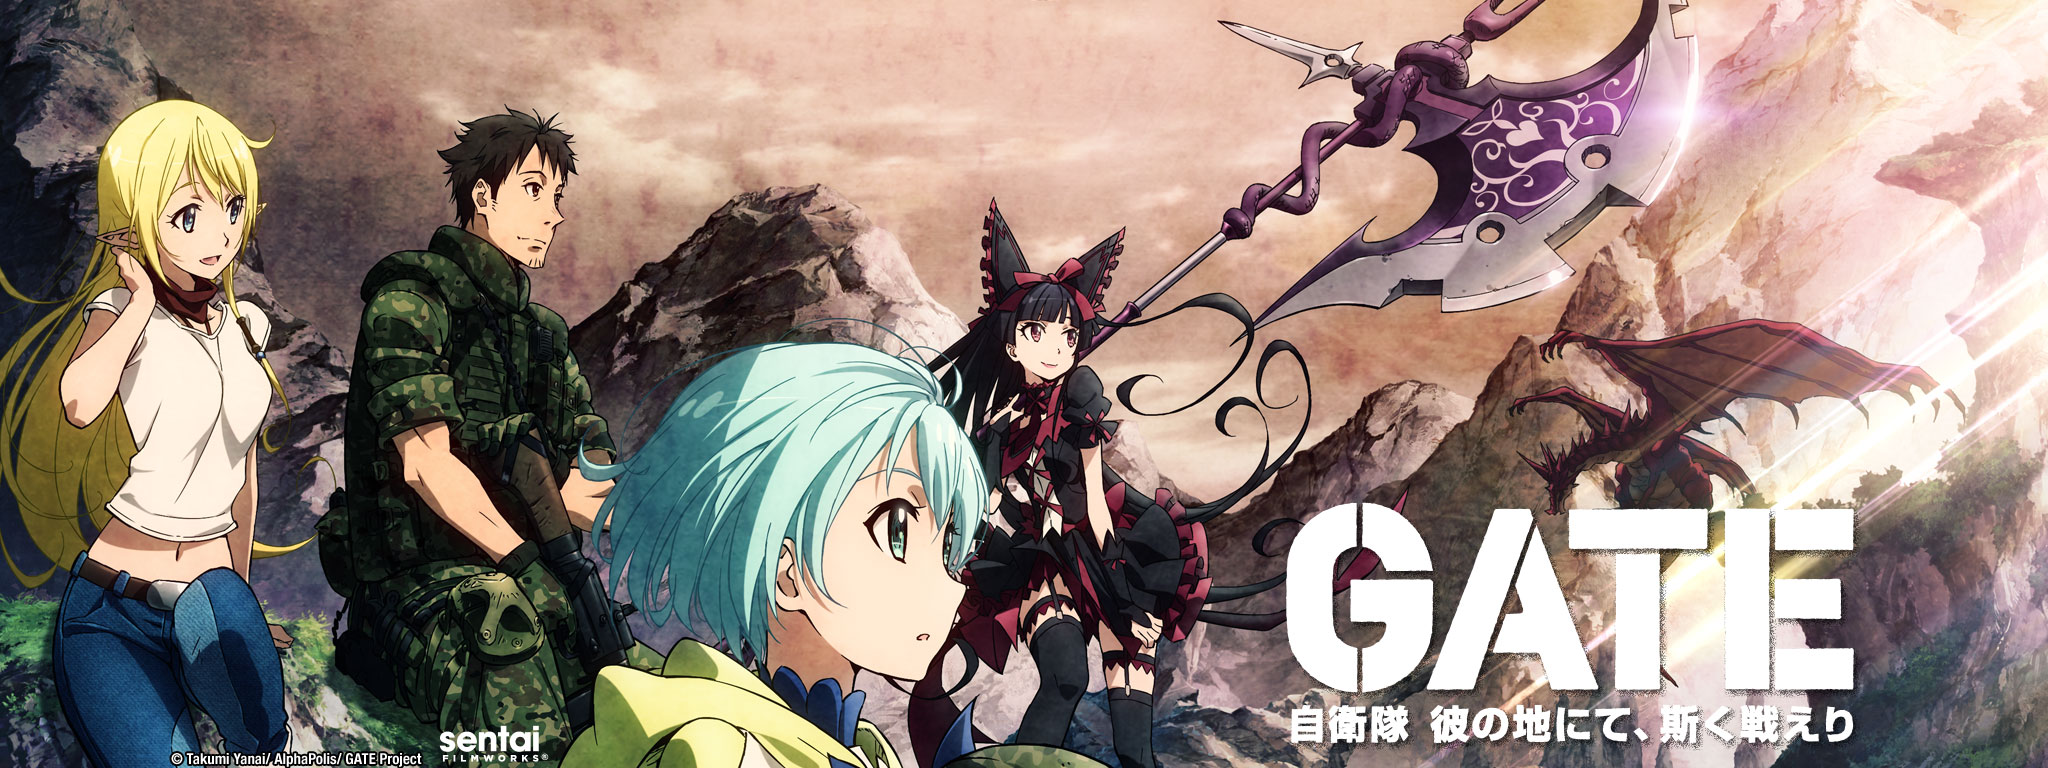 Title Art for GATE